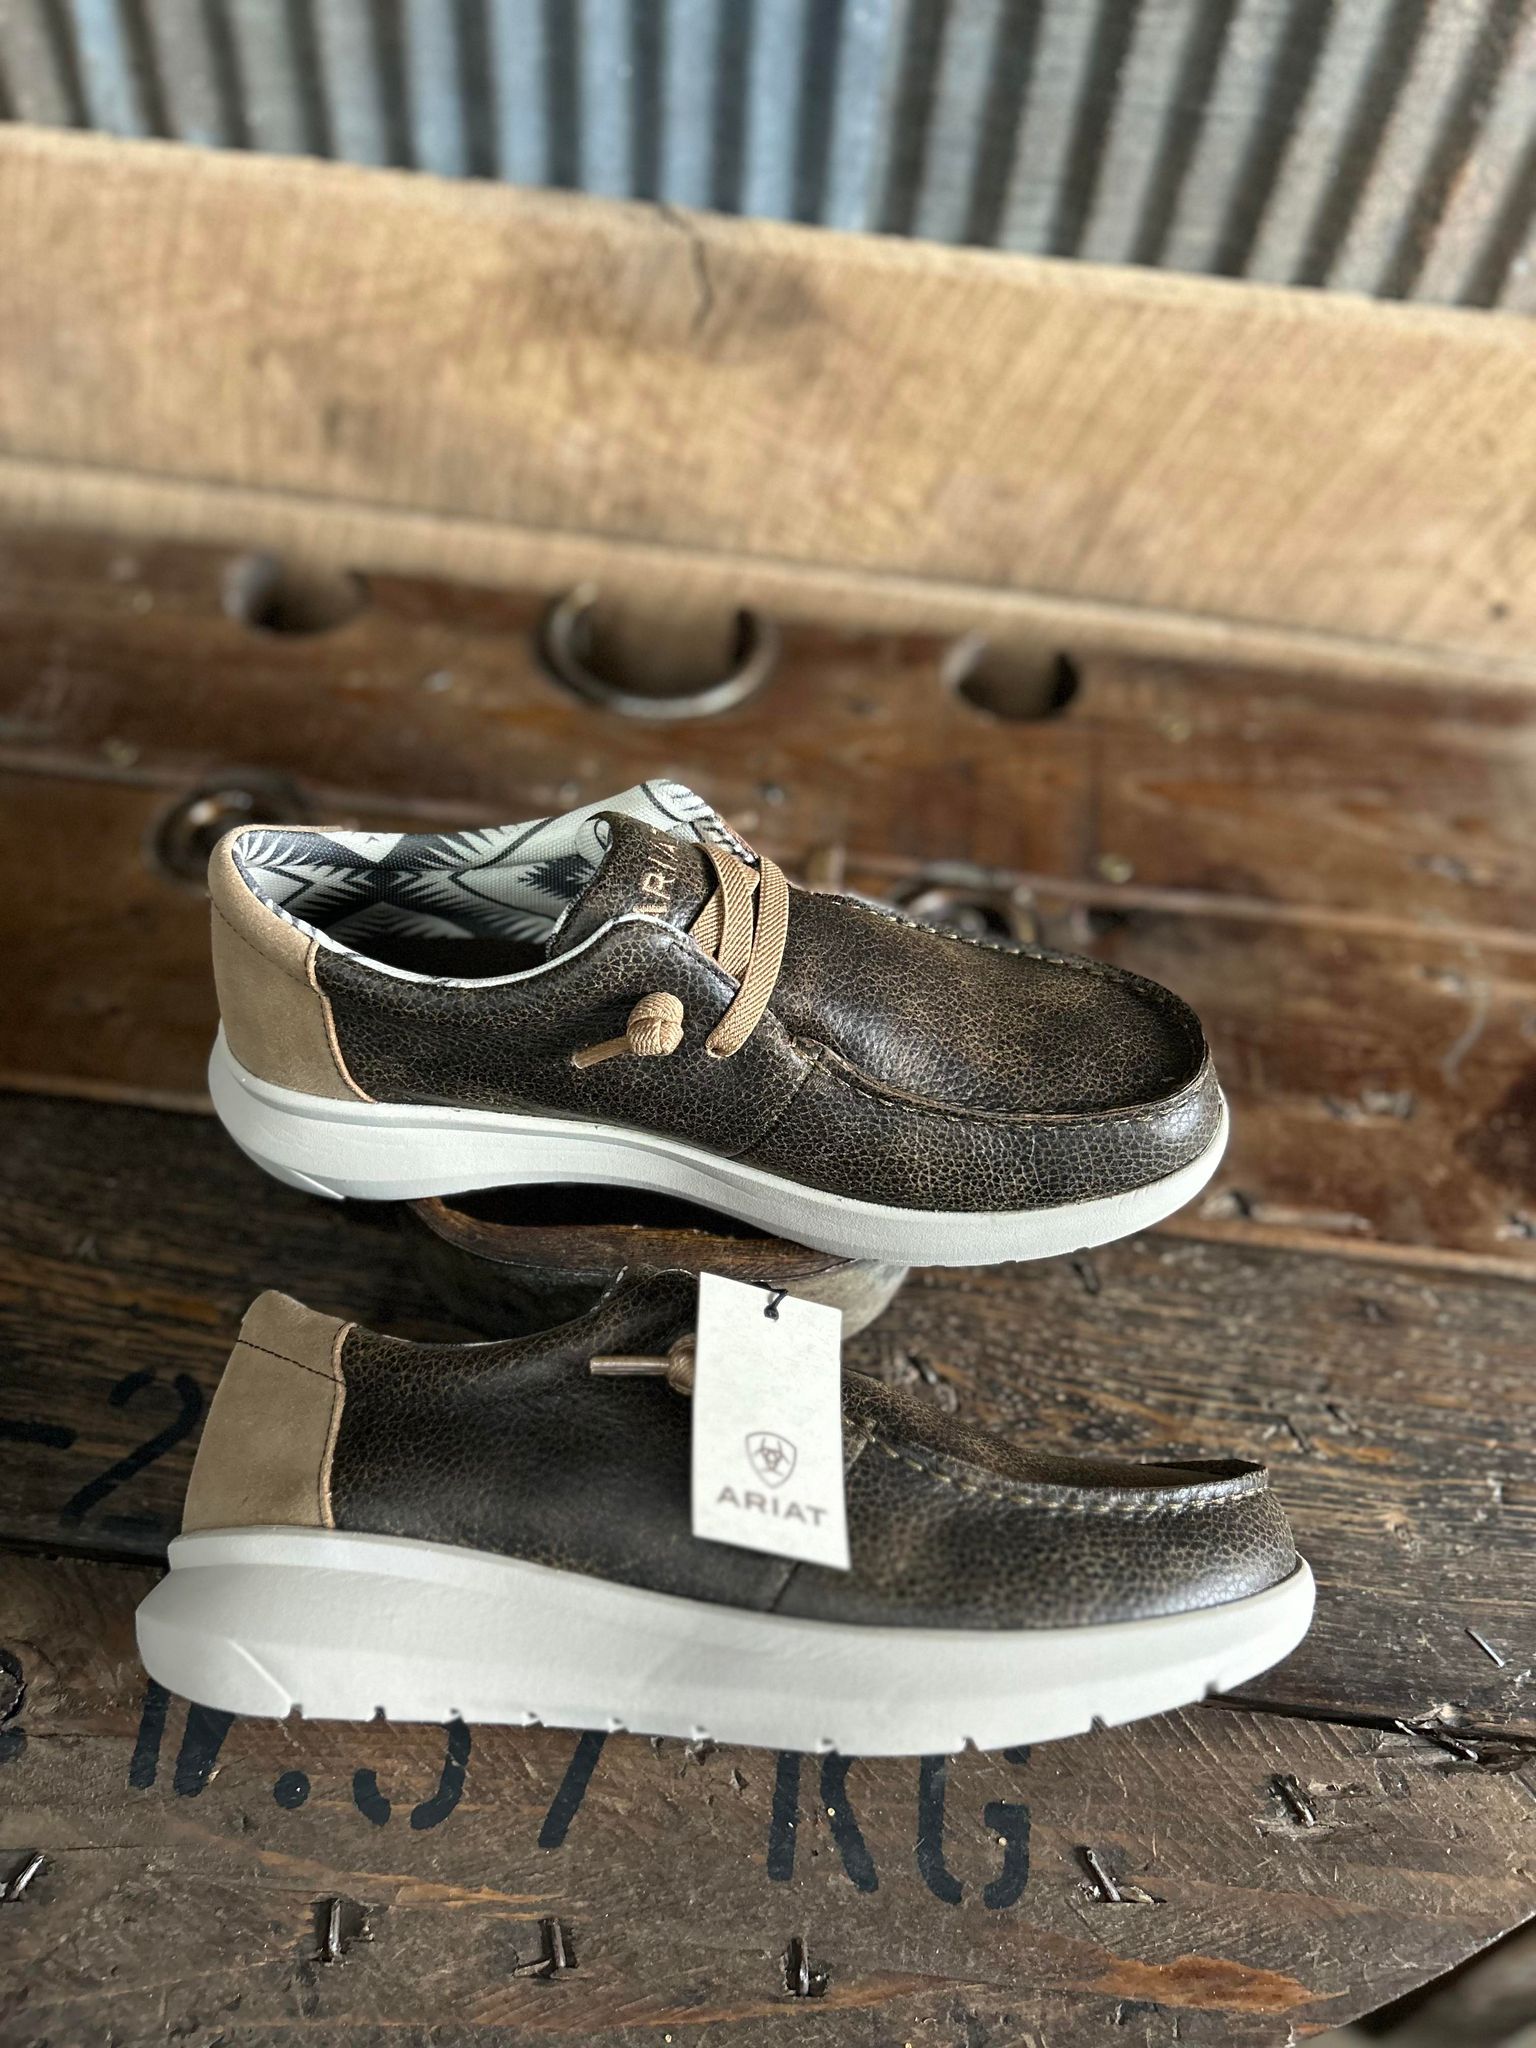 Ariat Men's Bordy Brown & Tan Hilos-Men's Casual Shoes-Ariat-Lucky J Boots & More, Women's, Men's, & Kids Western Store Located in Carthage, MO